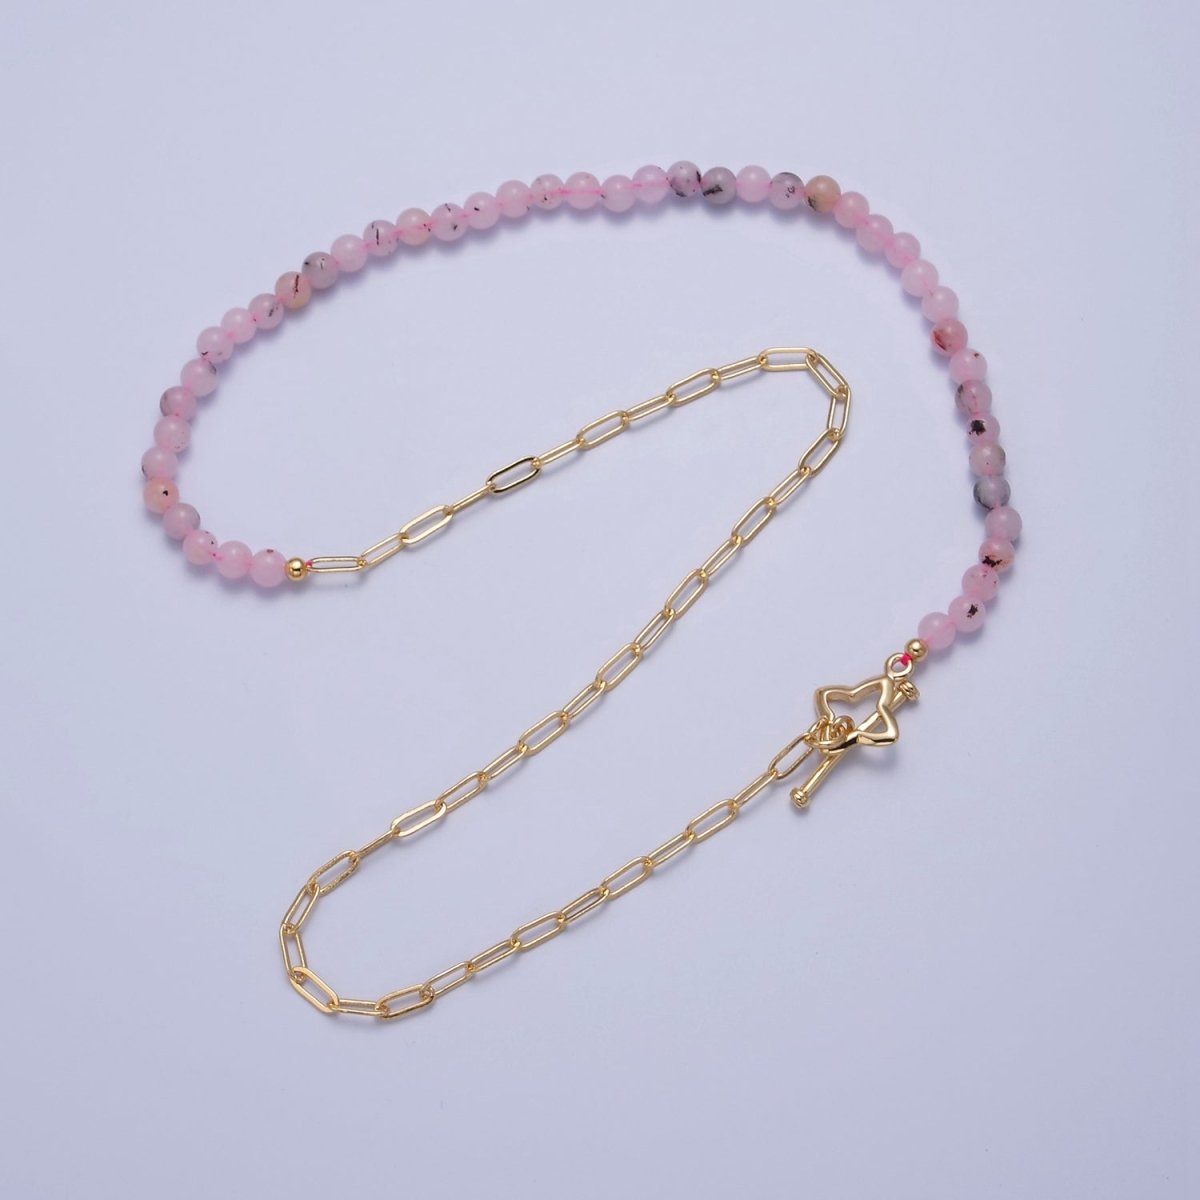 Dainty Half Bead Half Link Chain Necklace, 24k Gold Filled Paperclip Chain with Pink Jade Necklace Toggle Clasp | WA-972 Clearance Pricing - DLUXCA